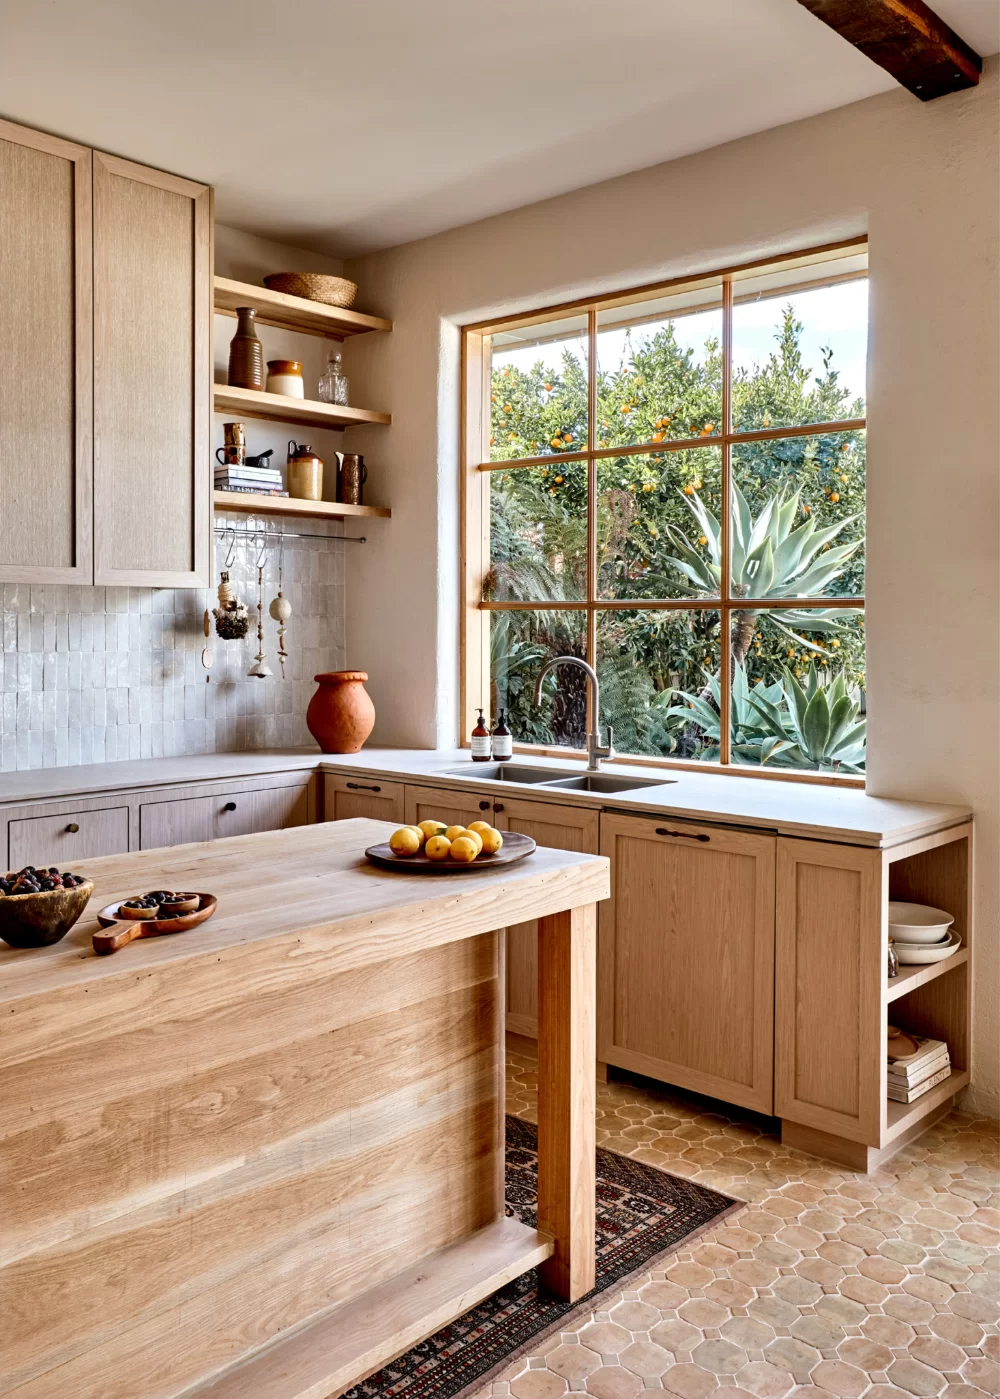 Create a custom kitchen design by adding Large windows over sink area